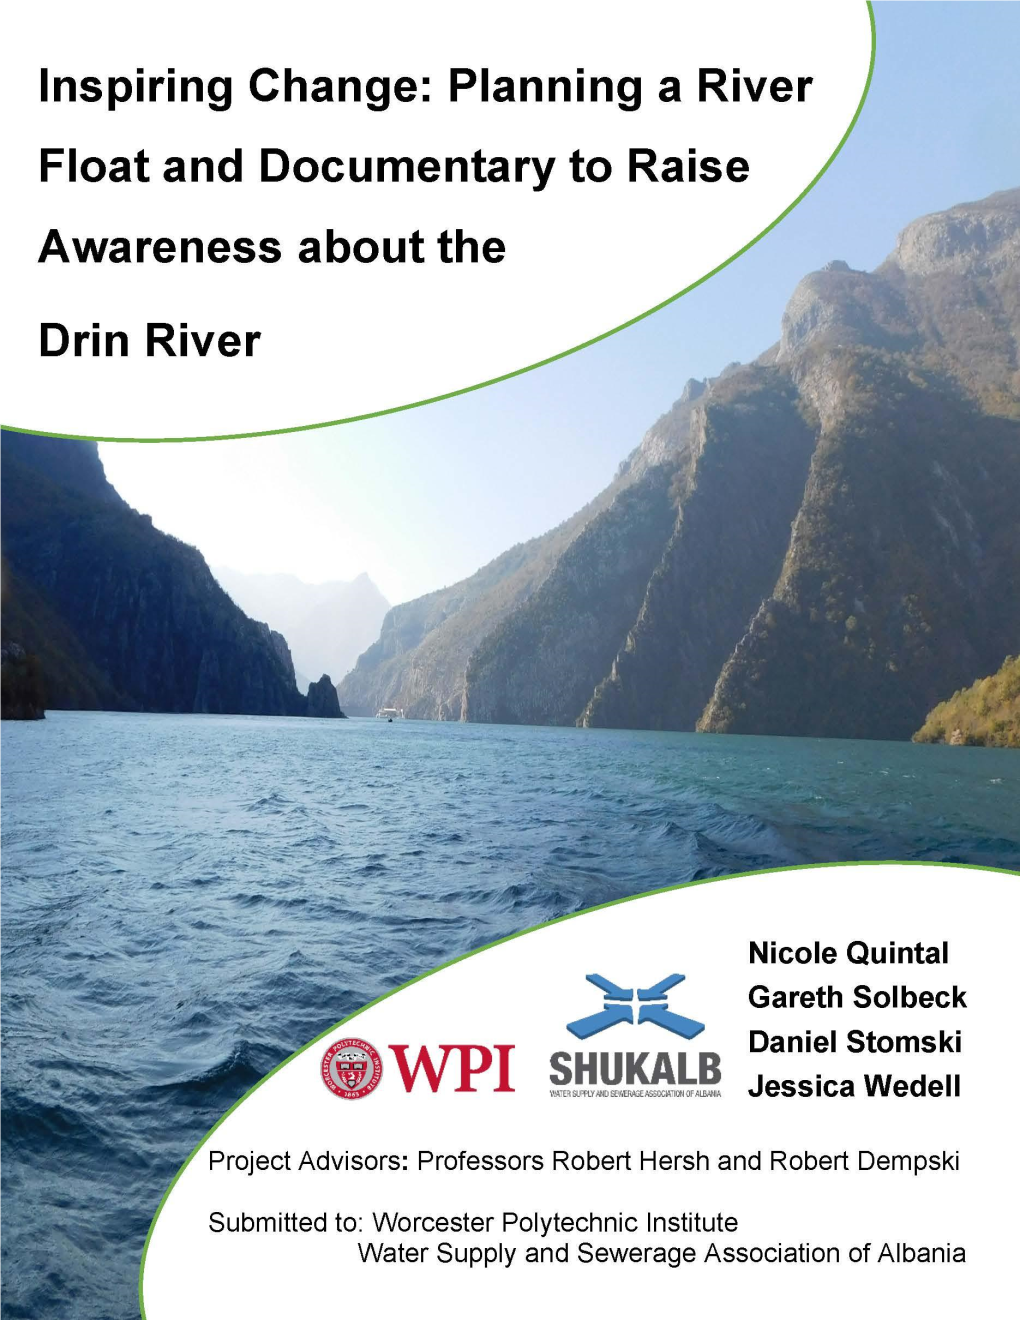 Inspiring Change: Planning a River Float and Documentary to Raise Awareness About the Drin River